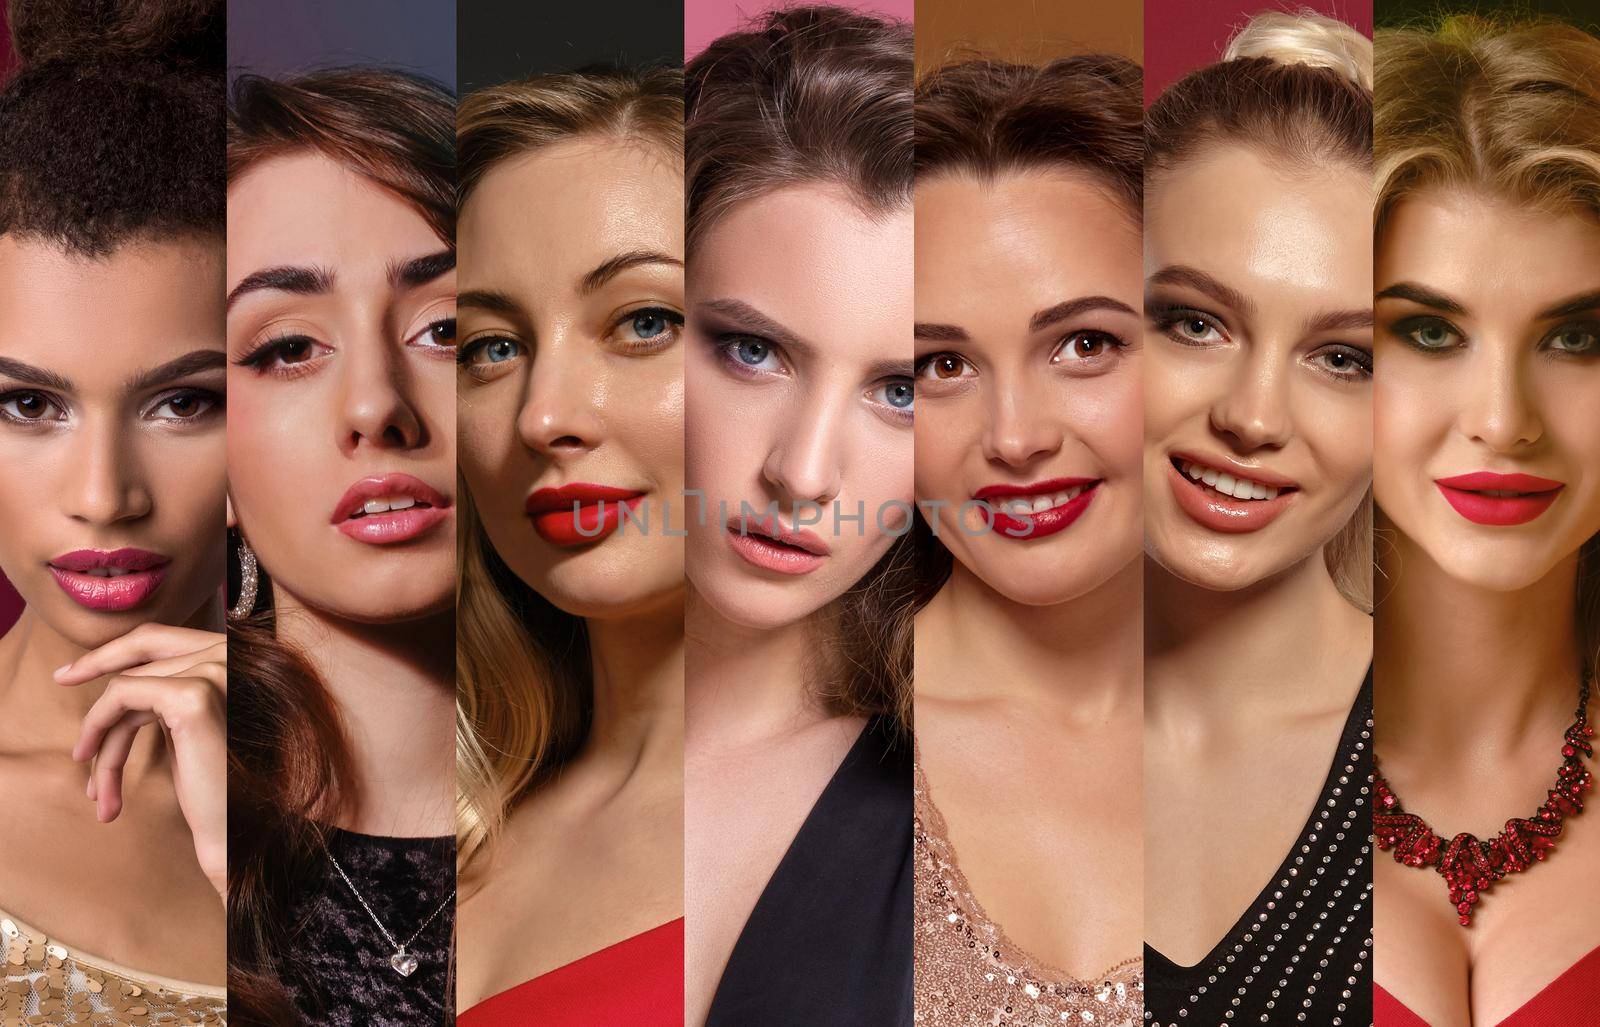 Collage of females faces with bright make-up and stylish jewelry. Expressing different facial emotions against colorful backgrounds. Close-up by nazarovsergey